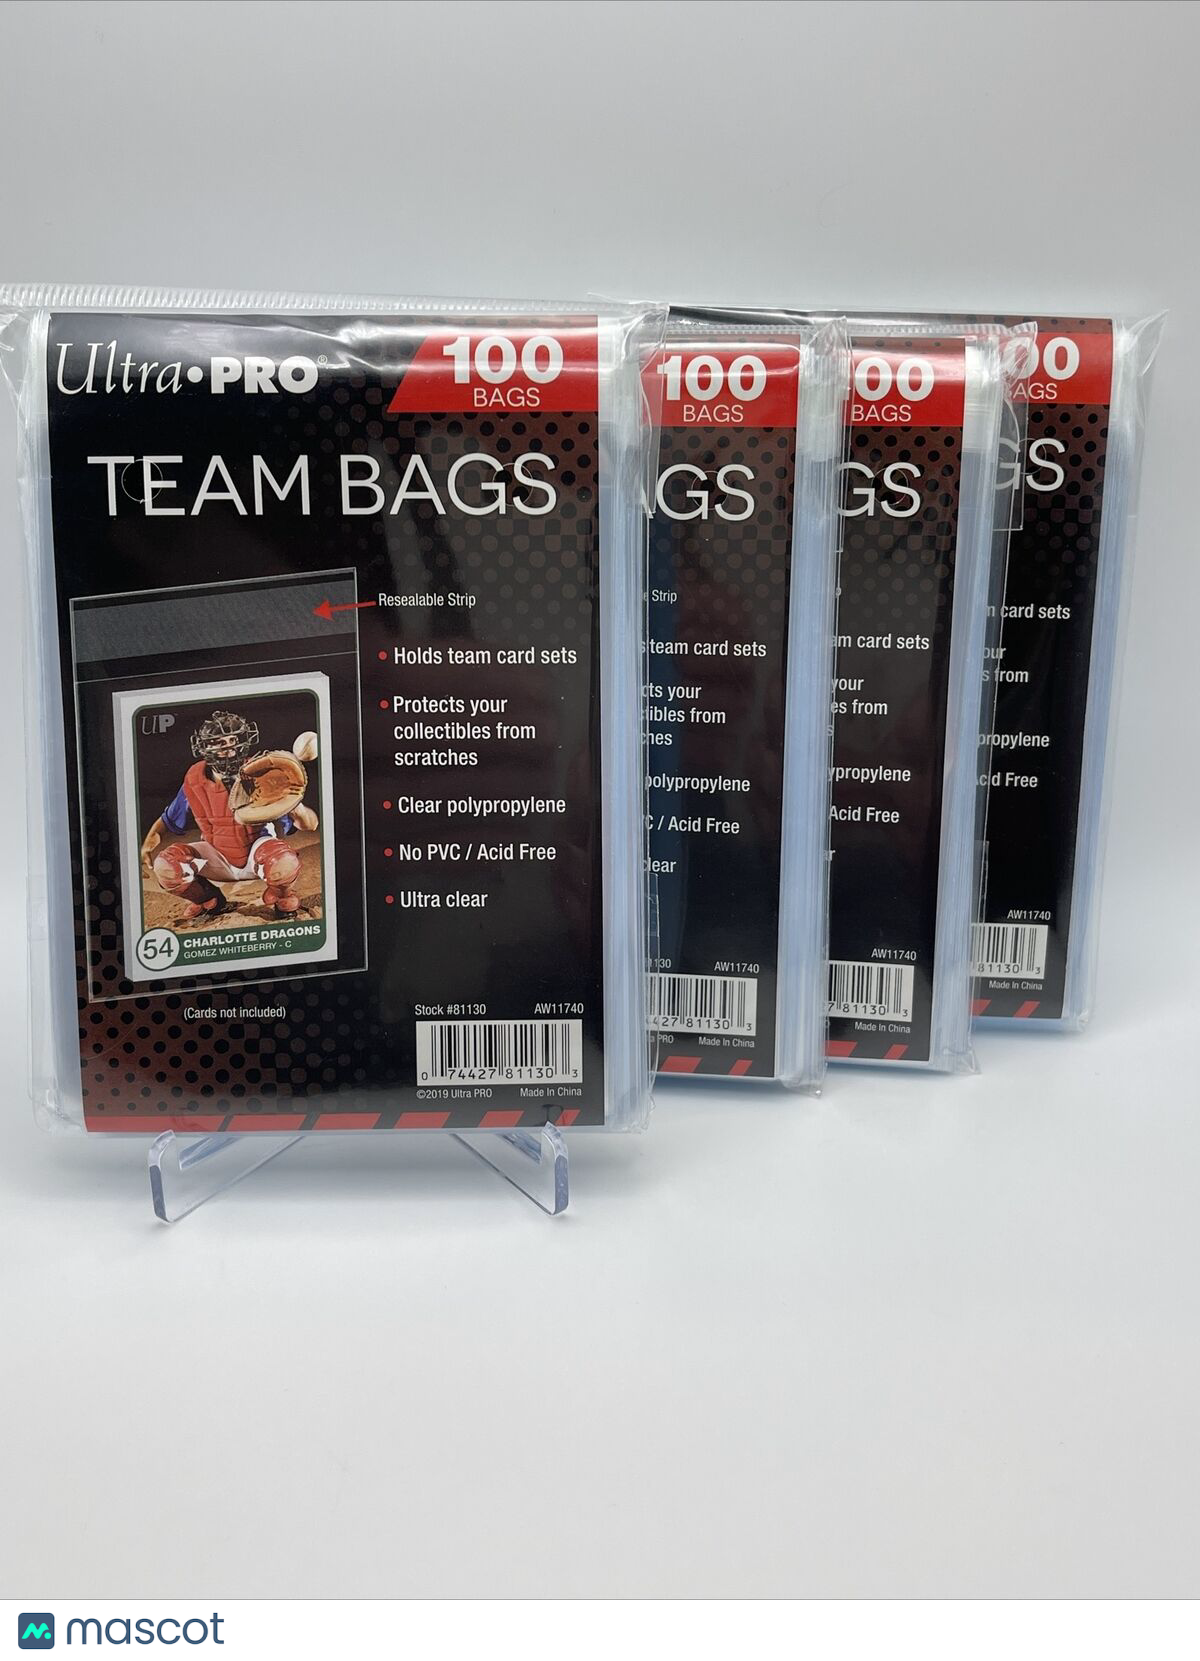 Ultra Pro Resealable Team Bags 4 Packs of 100 Team Bags, 400 Total